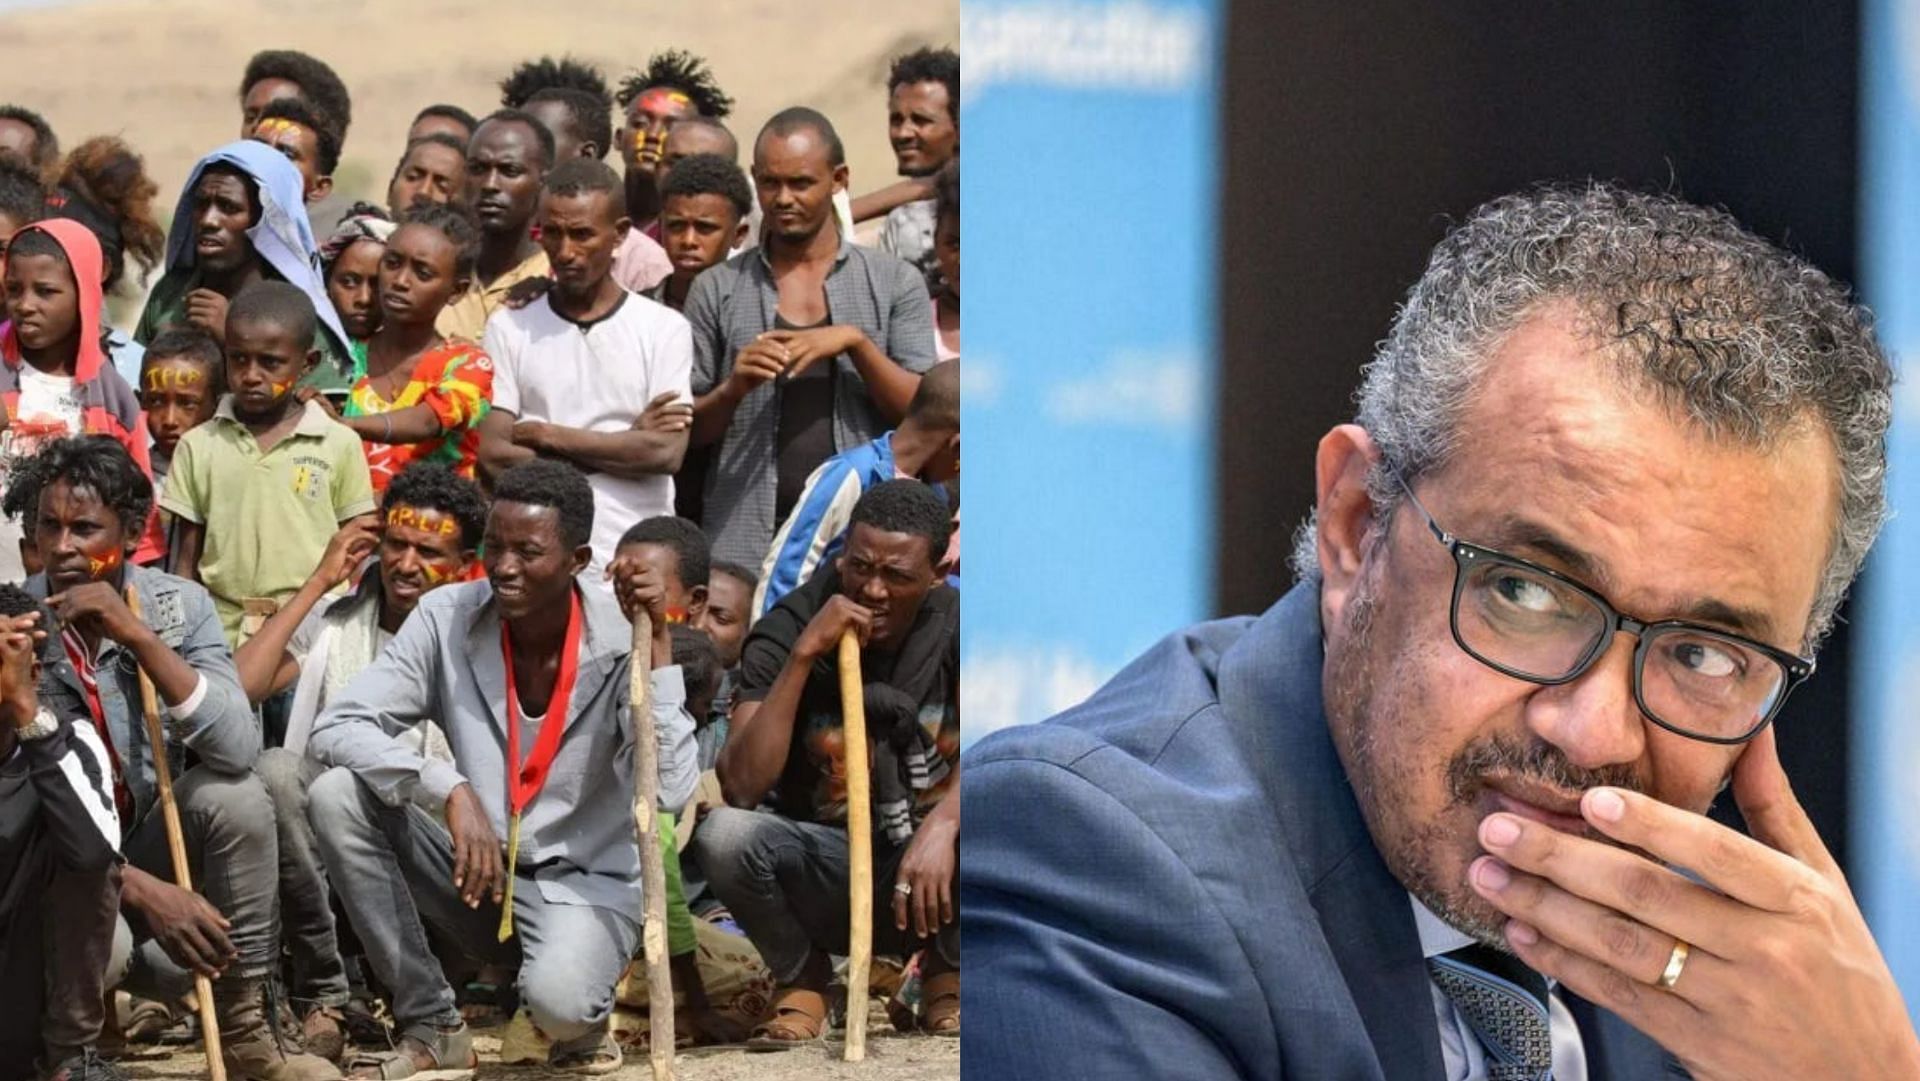 Tigray is experiencing a severe health crisis because of the ongoing conflicts between powerful parties. (Image via Hussein Ery/Getty, AFP/Getty)